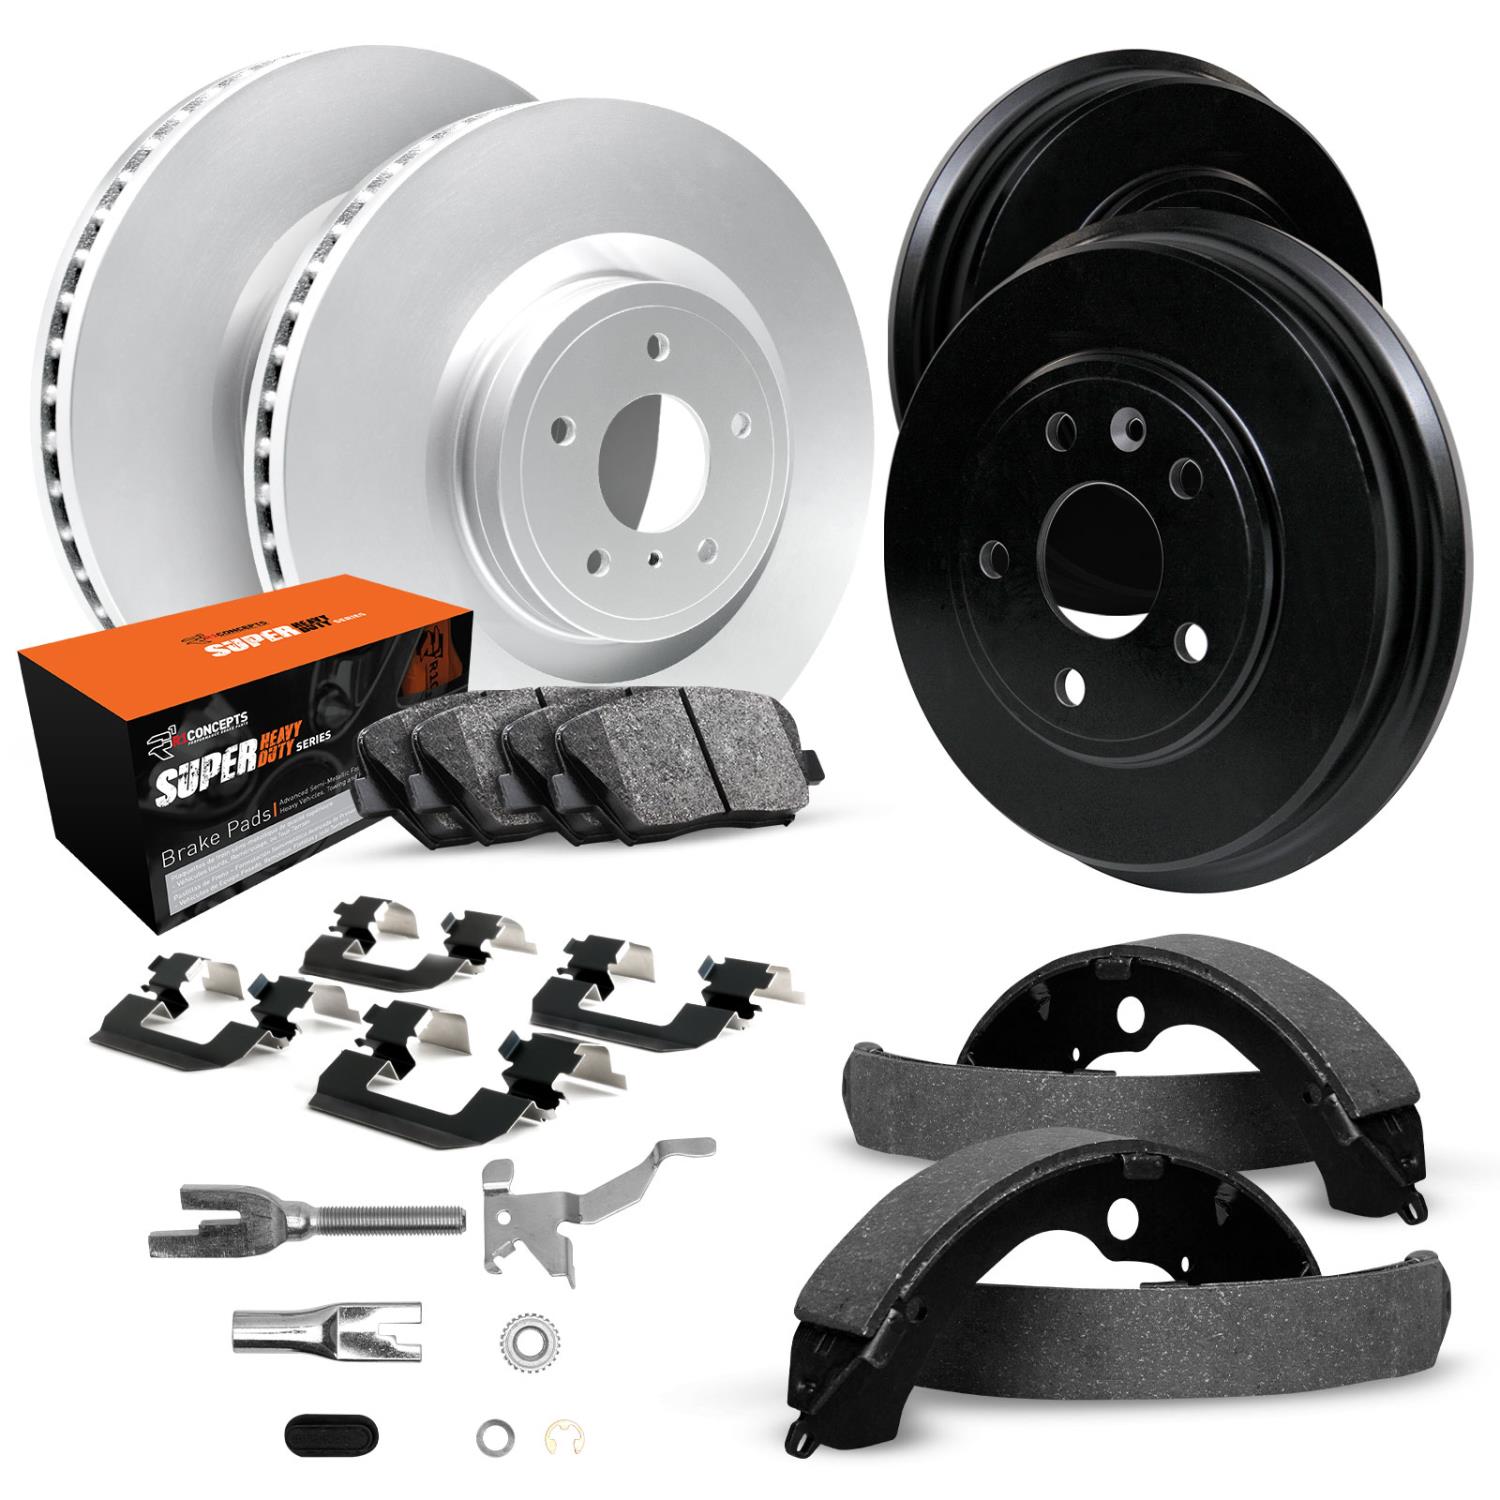 GEO-Carbon Brake Rotor & Drum Set w/Super-Duty Pads, Shoes, Hardware/Adjusters, 1986-1993 Ford/Lincoln/Mercury/Mazda